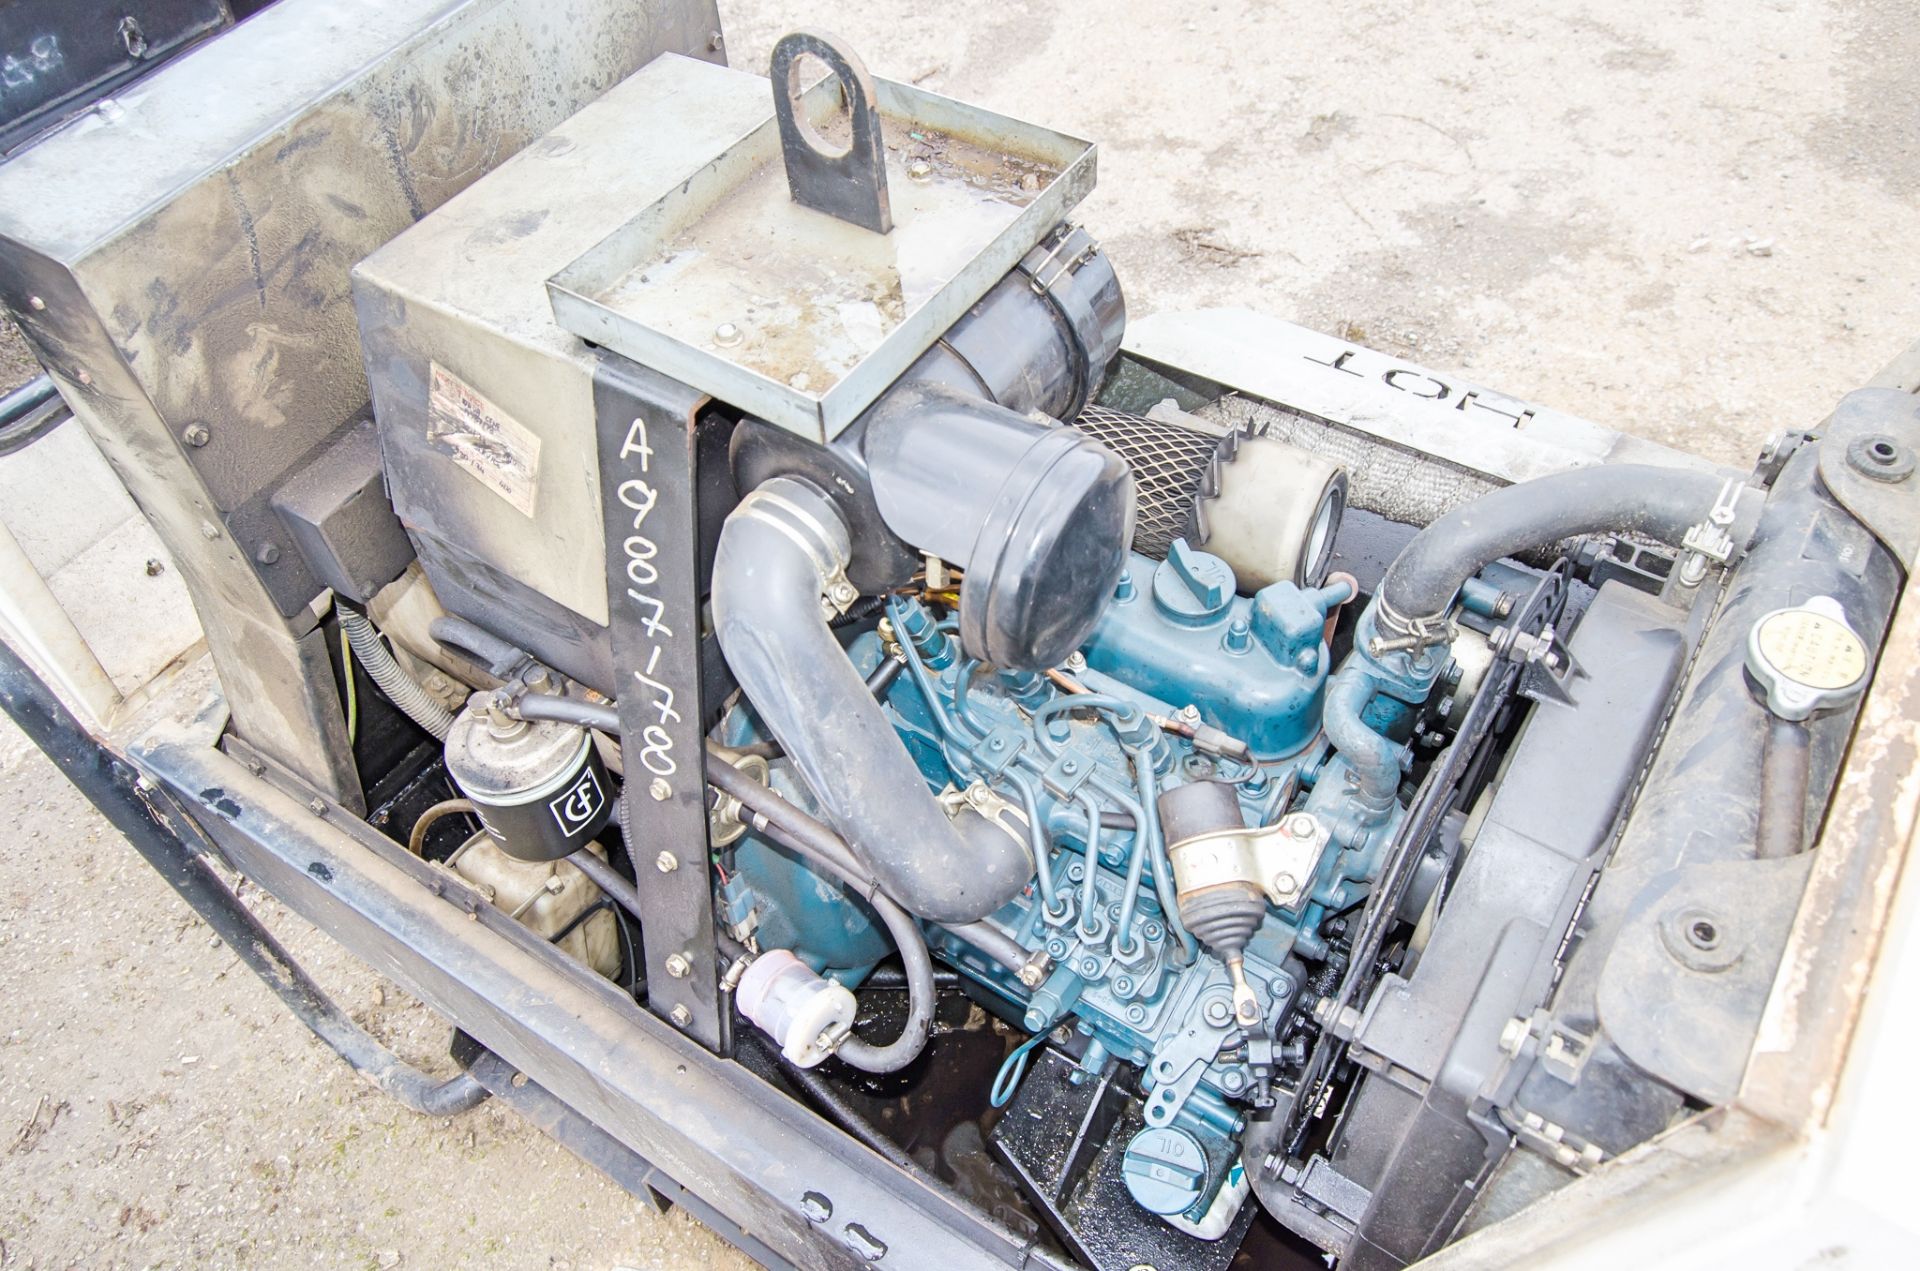 MHM MG1000 SSK-V 10 kva diesel driven generator S/N: 229180112 Recorded hours: 5343 A987178 - Image 4 of 4